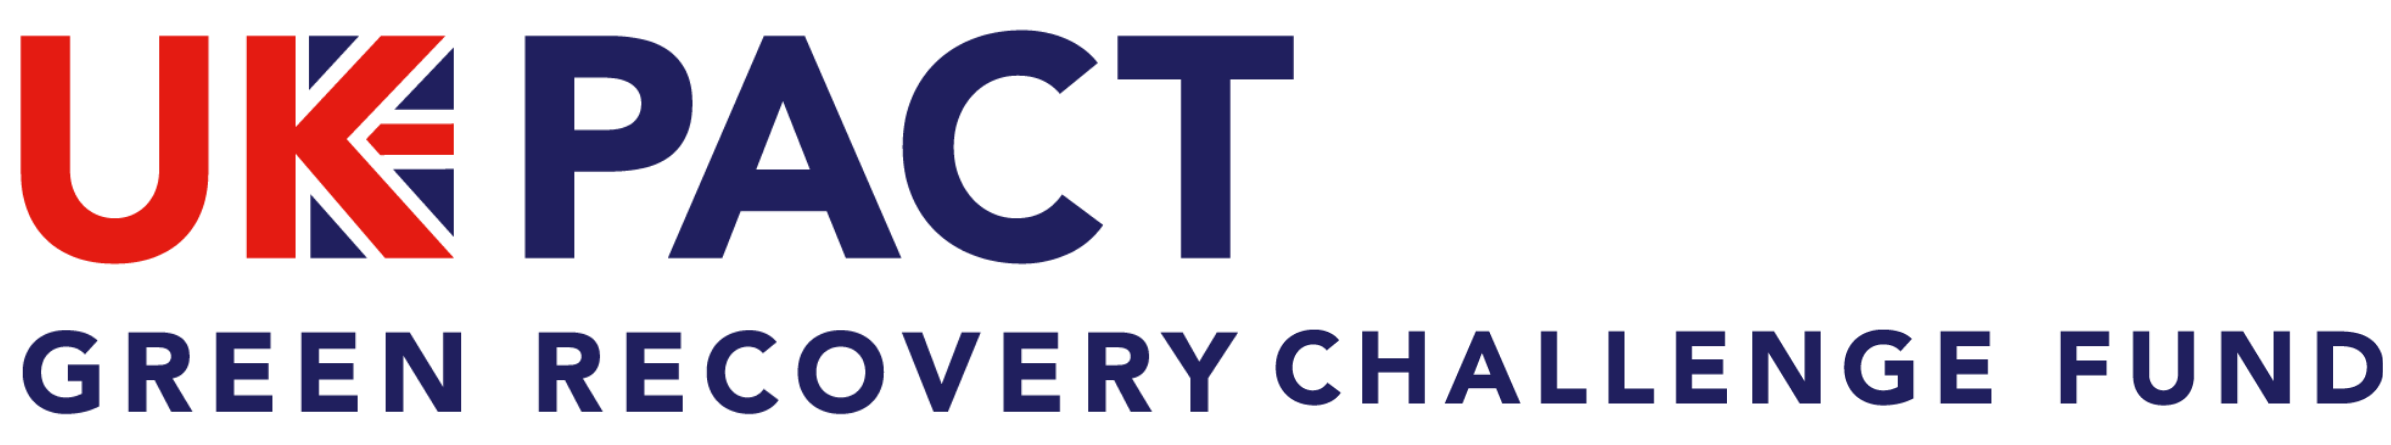 UK PACT Green Recovery Challenge Fund